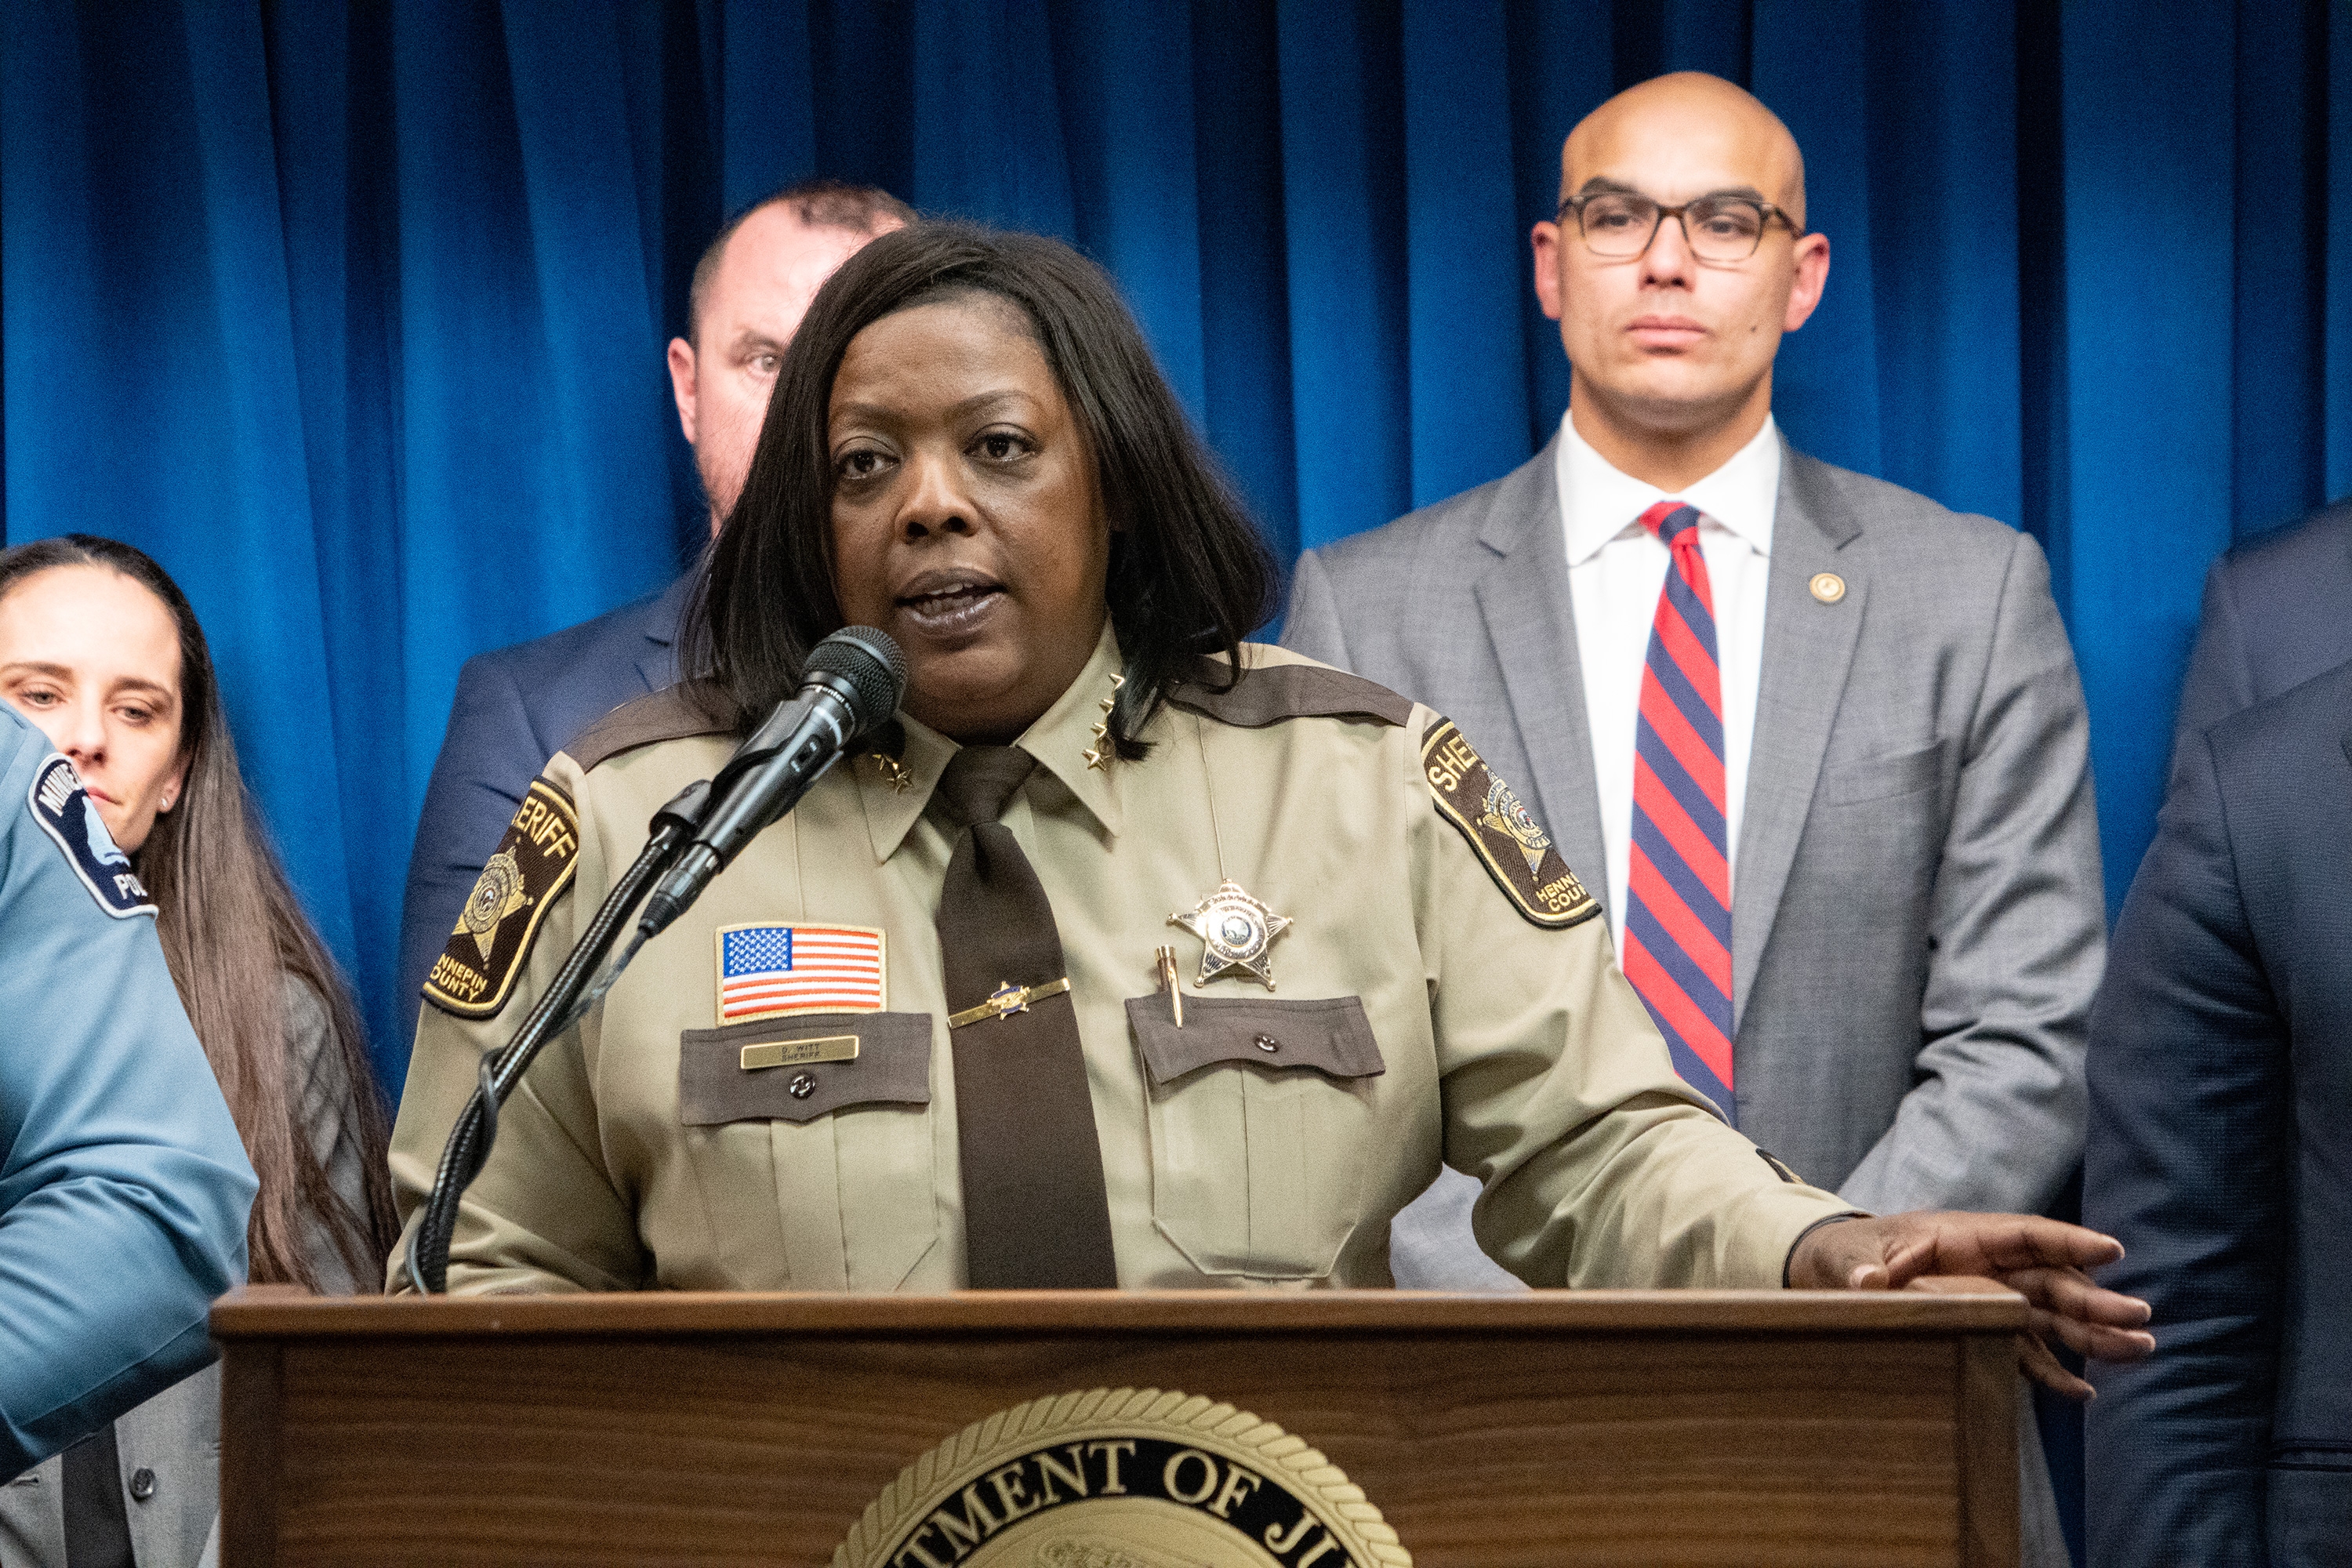 Hennepin County Sheriff Dawanna S. Witt delivers remarks from a podium at the United States Attorney’s Office for the District of Minnesota office in Minneapolis, Minnesota. Other officials stand in a row behind.